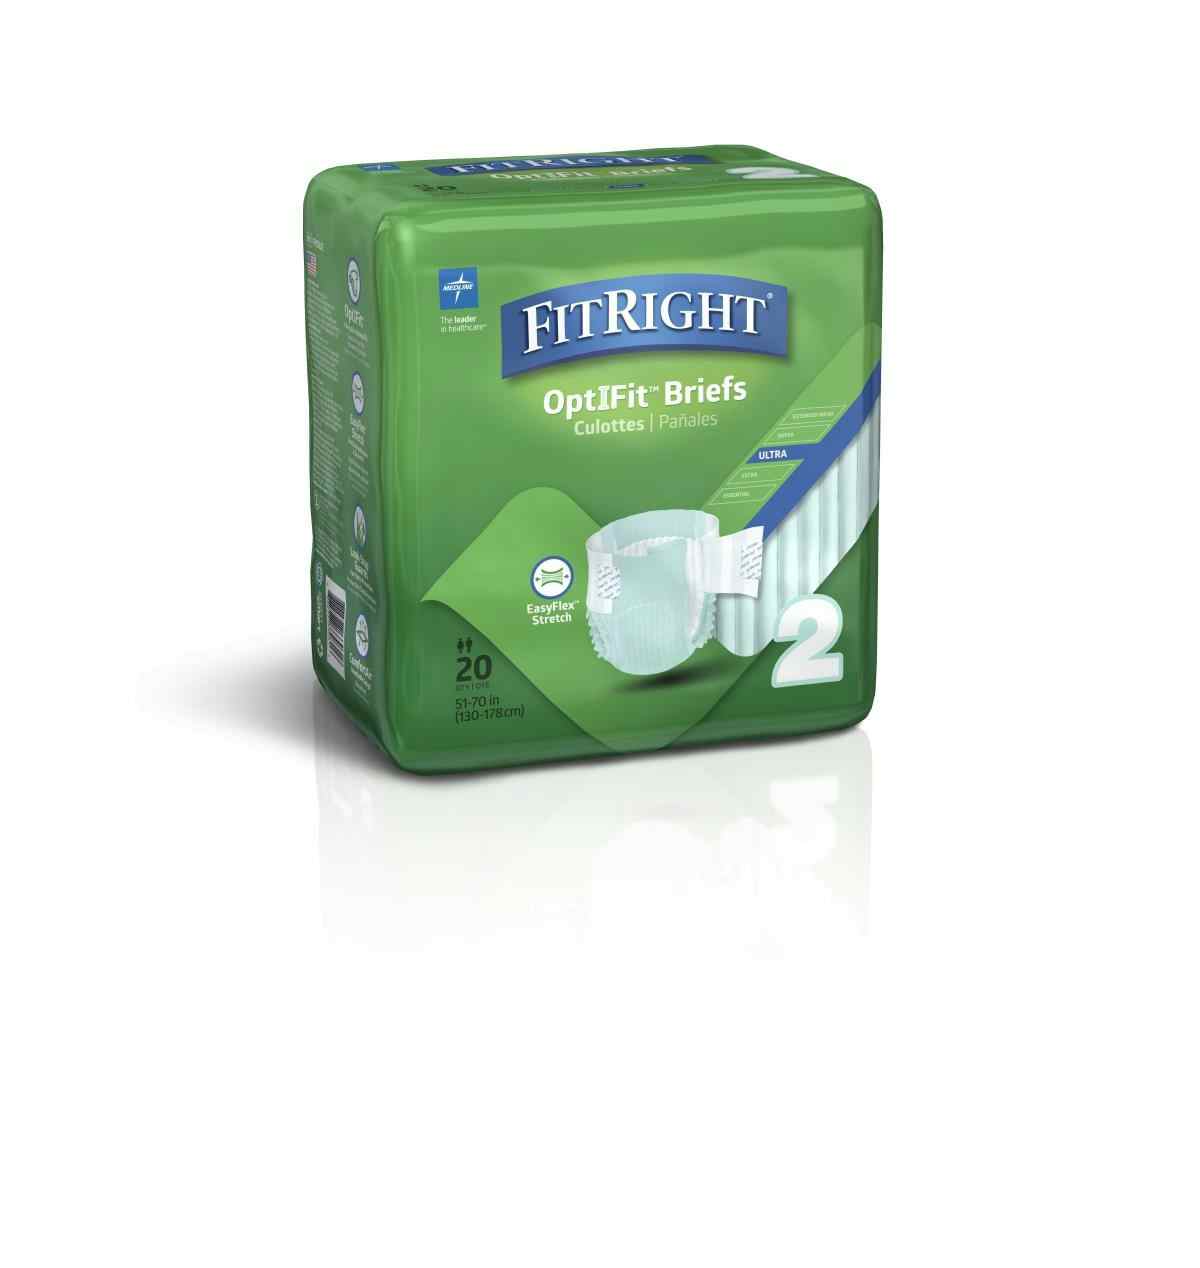 FitRight OptiFit Ultra Incontinence Briefs with Center Tab Adult Diapers, Heavy Absorbency, FRSU2, Large/XL/2XL (51"-70") -  Case of 20